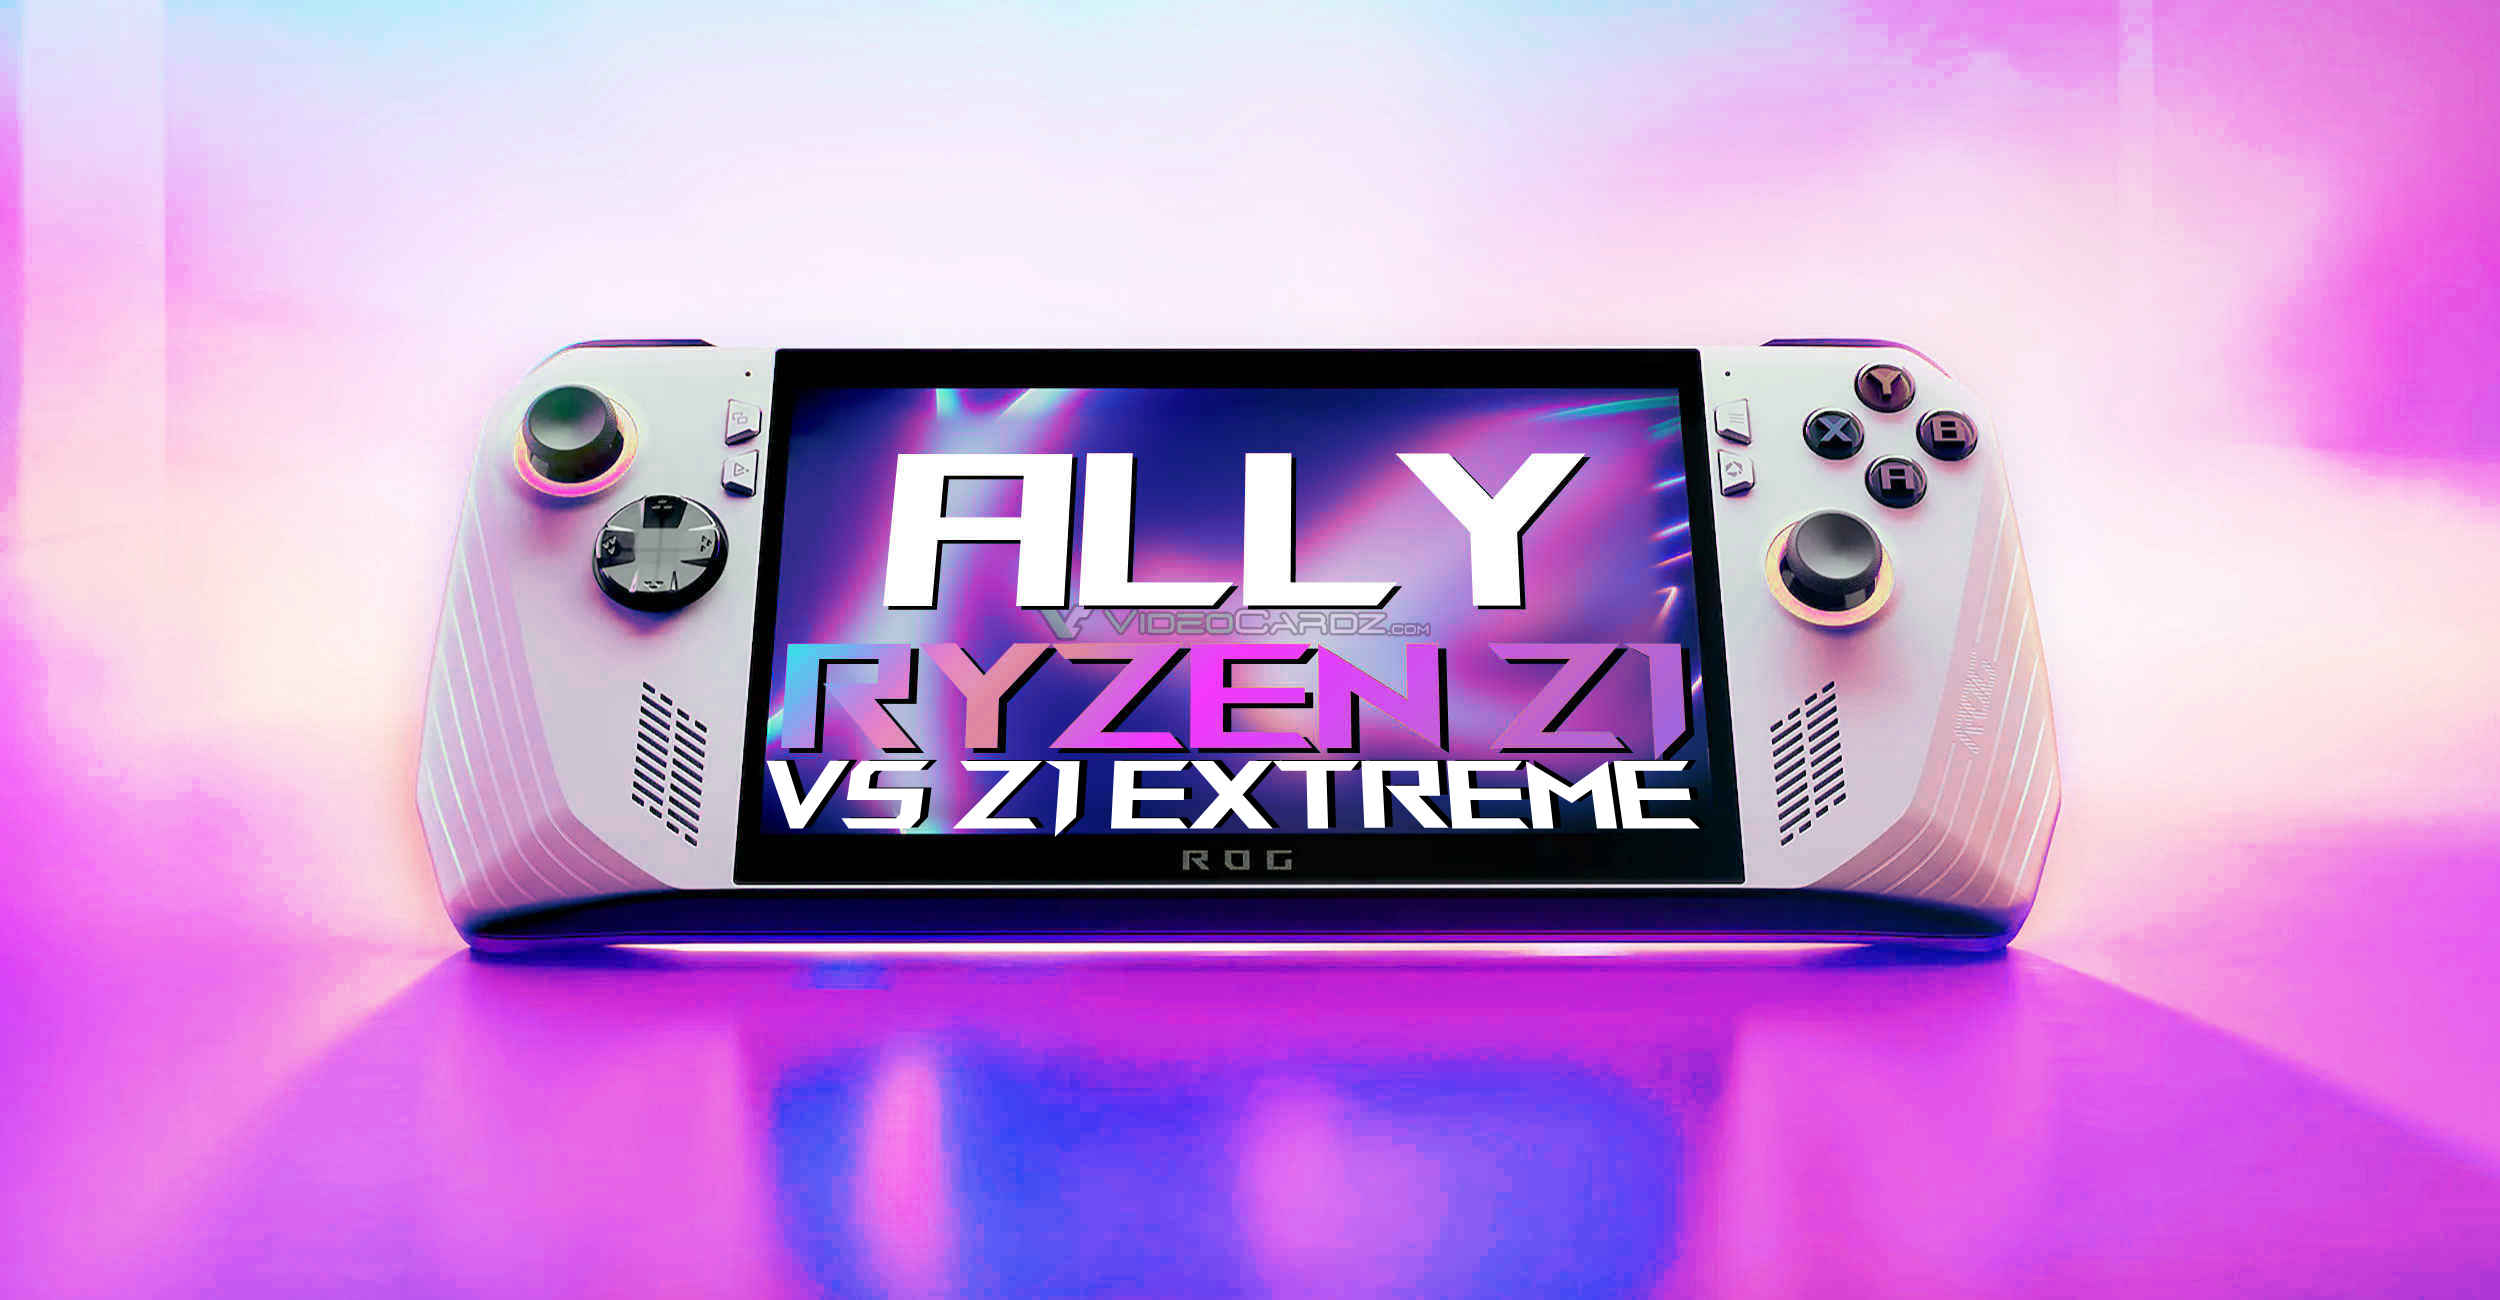 AMD Ryzen Z1 and Z1 Extreme APUs Debut in Asus ROG Ally Handheld